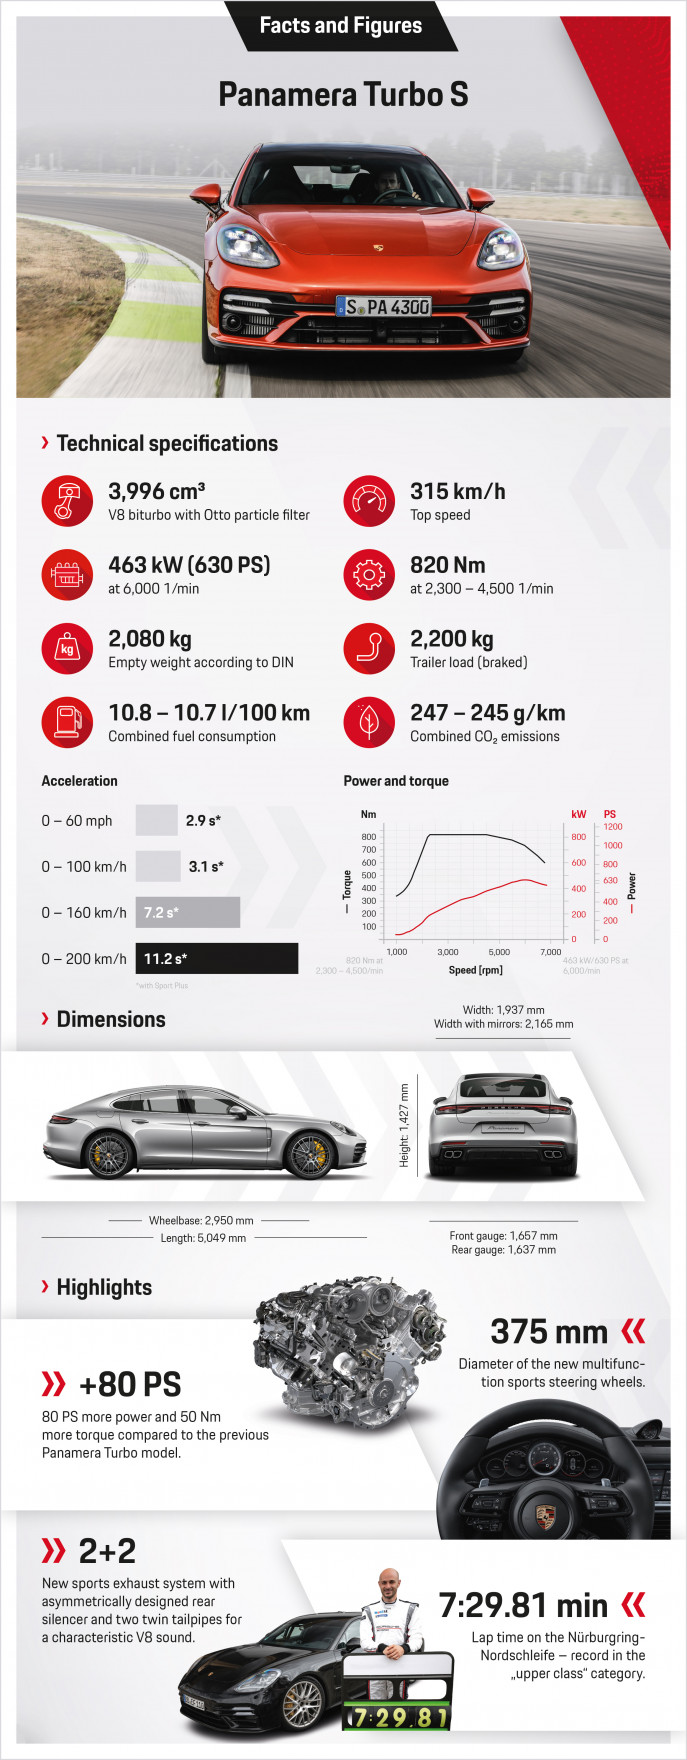 Porsche launches its latest Panamera line-up | The Business Standard